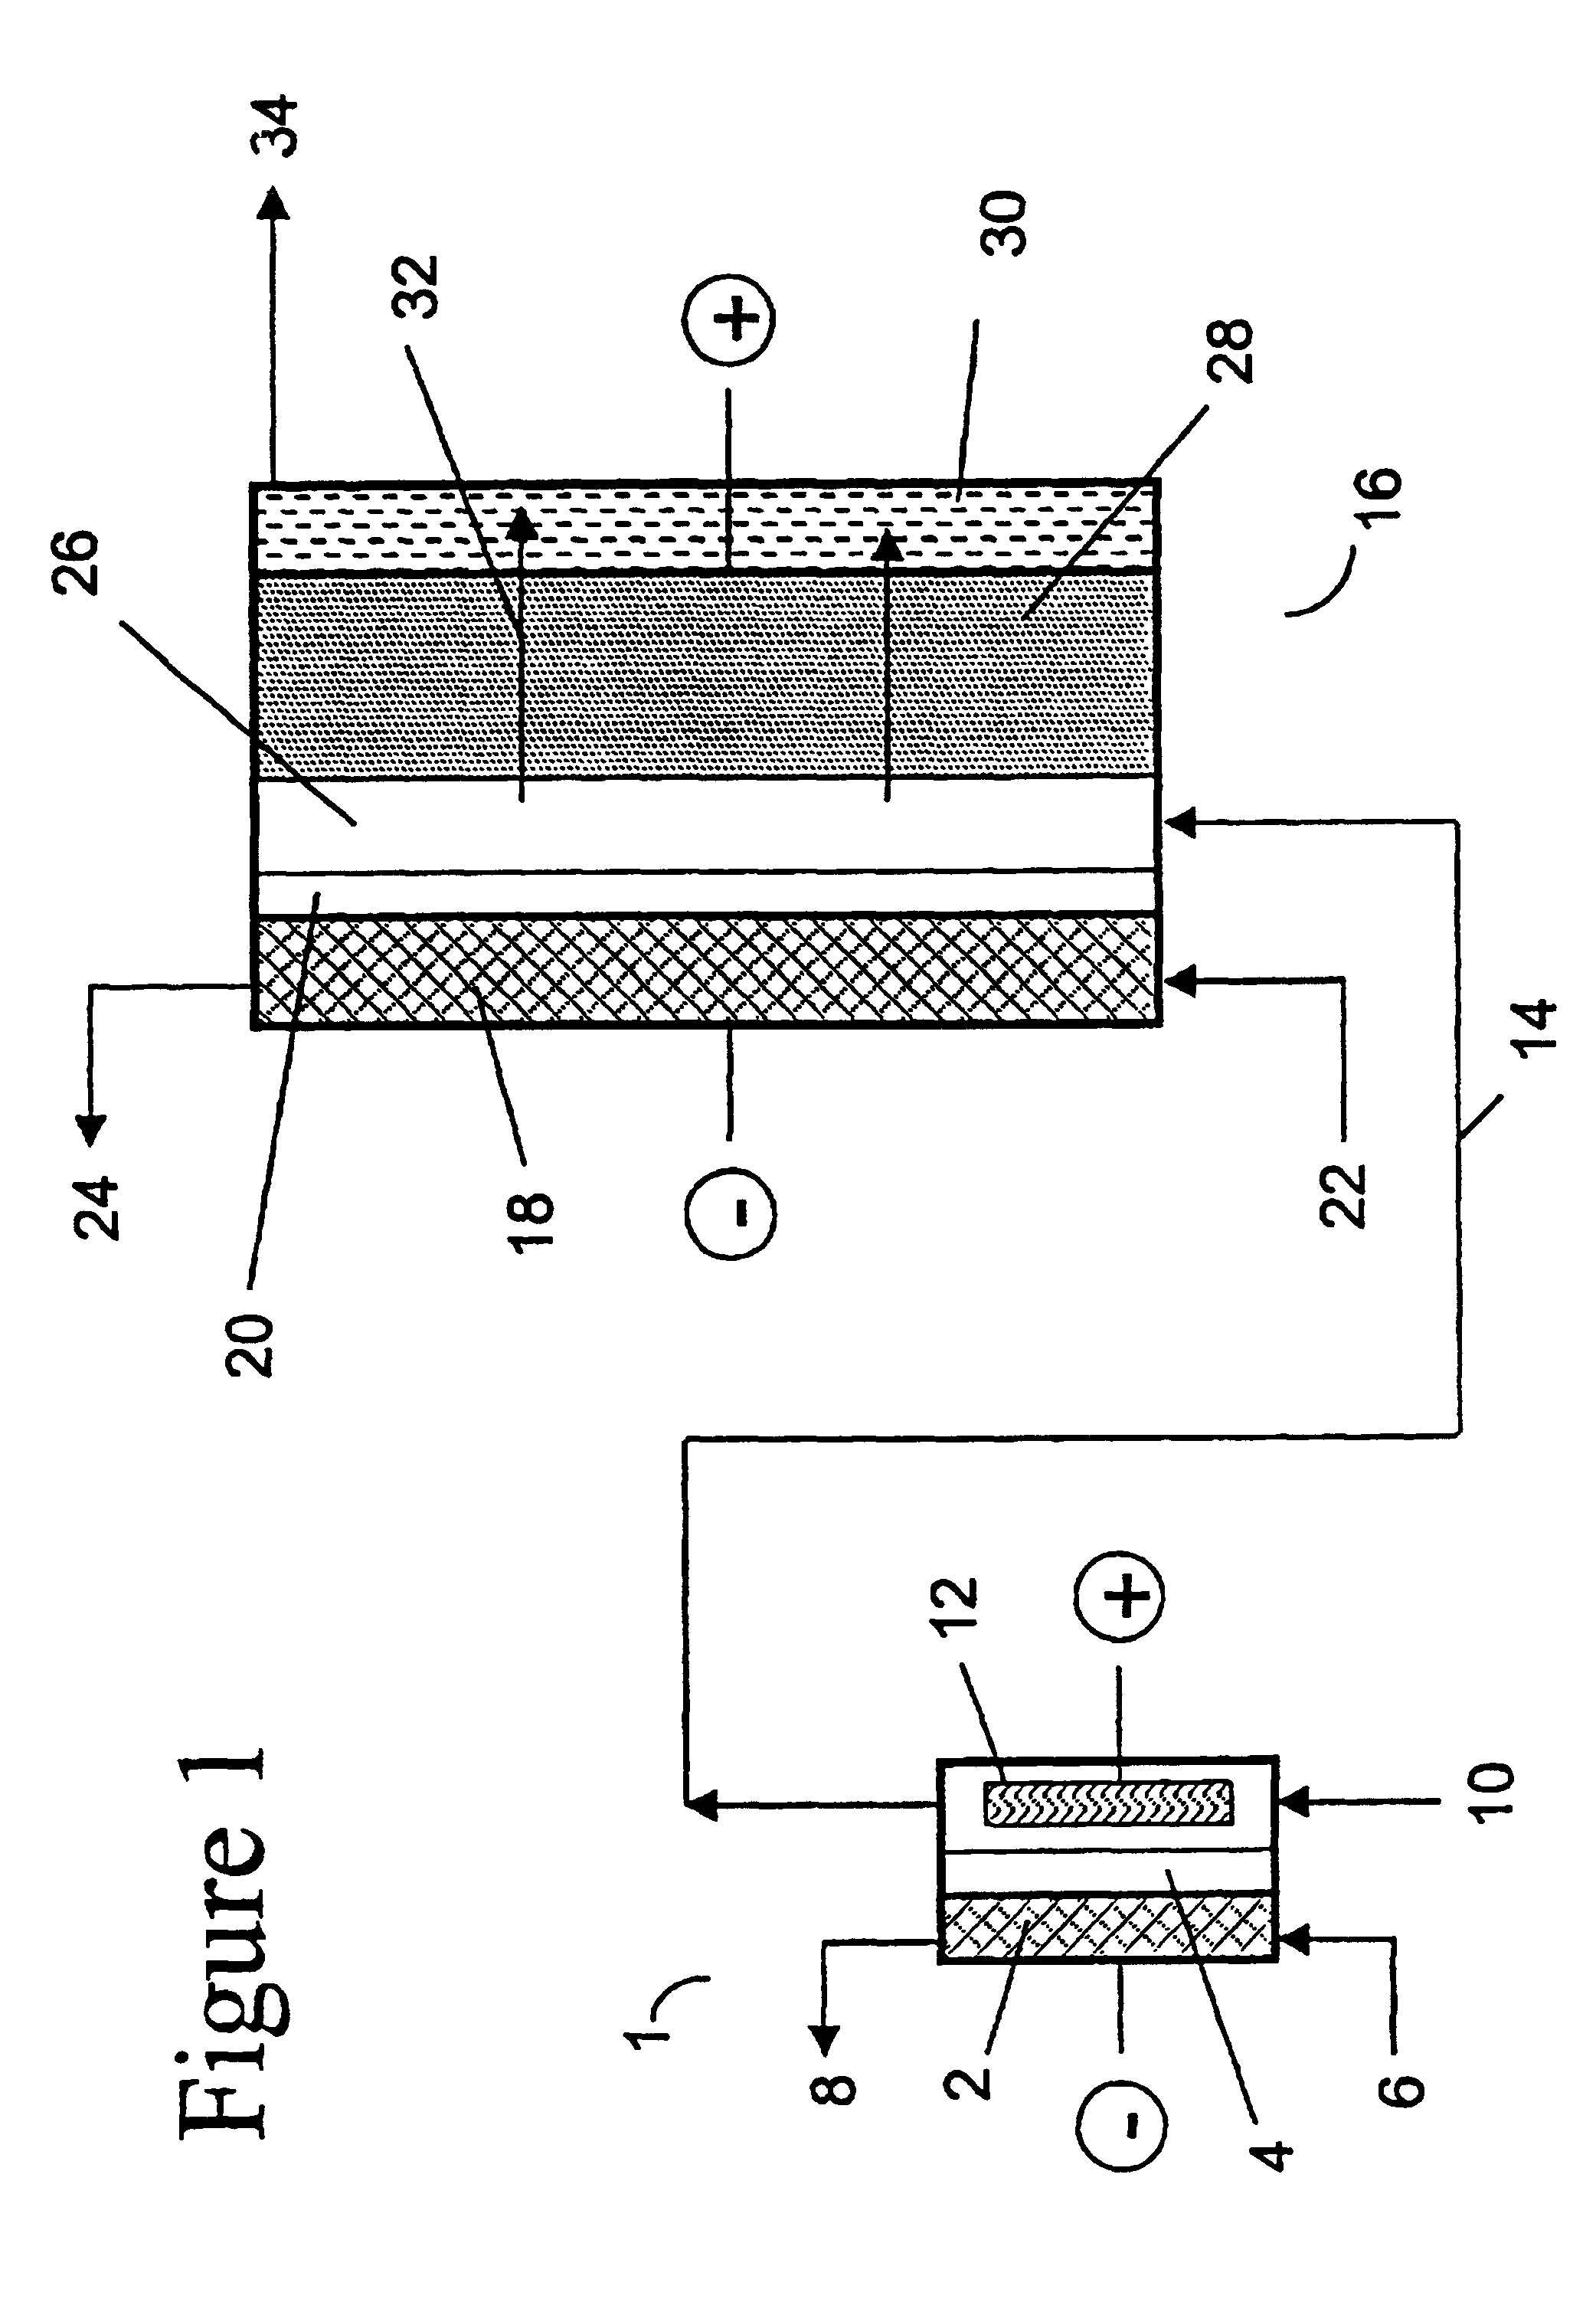 Electrolytic process for producing chlorine dioxide